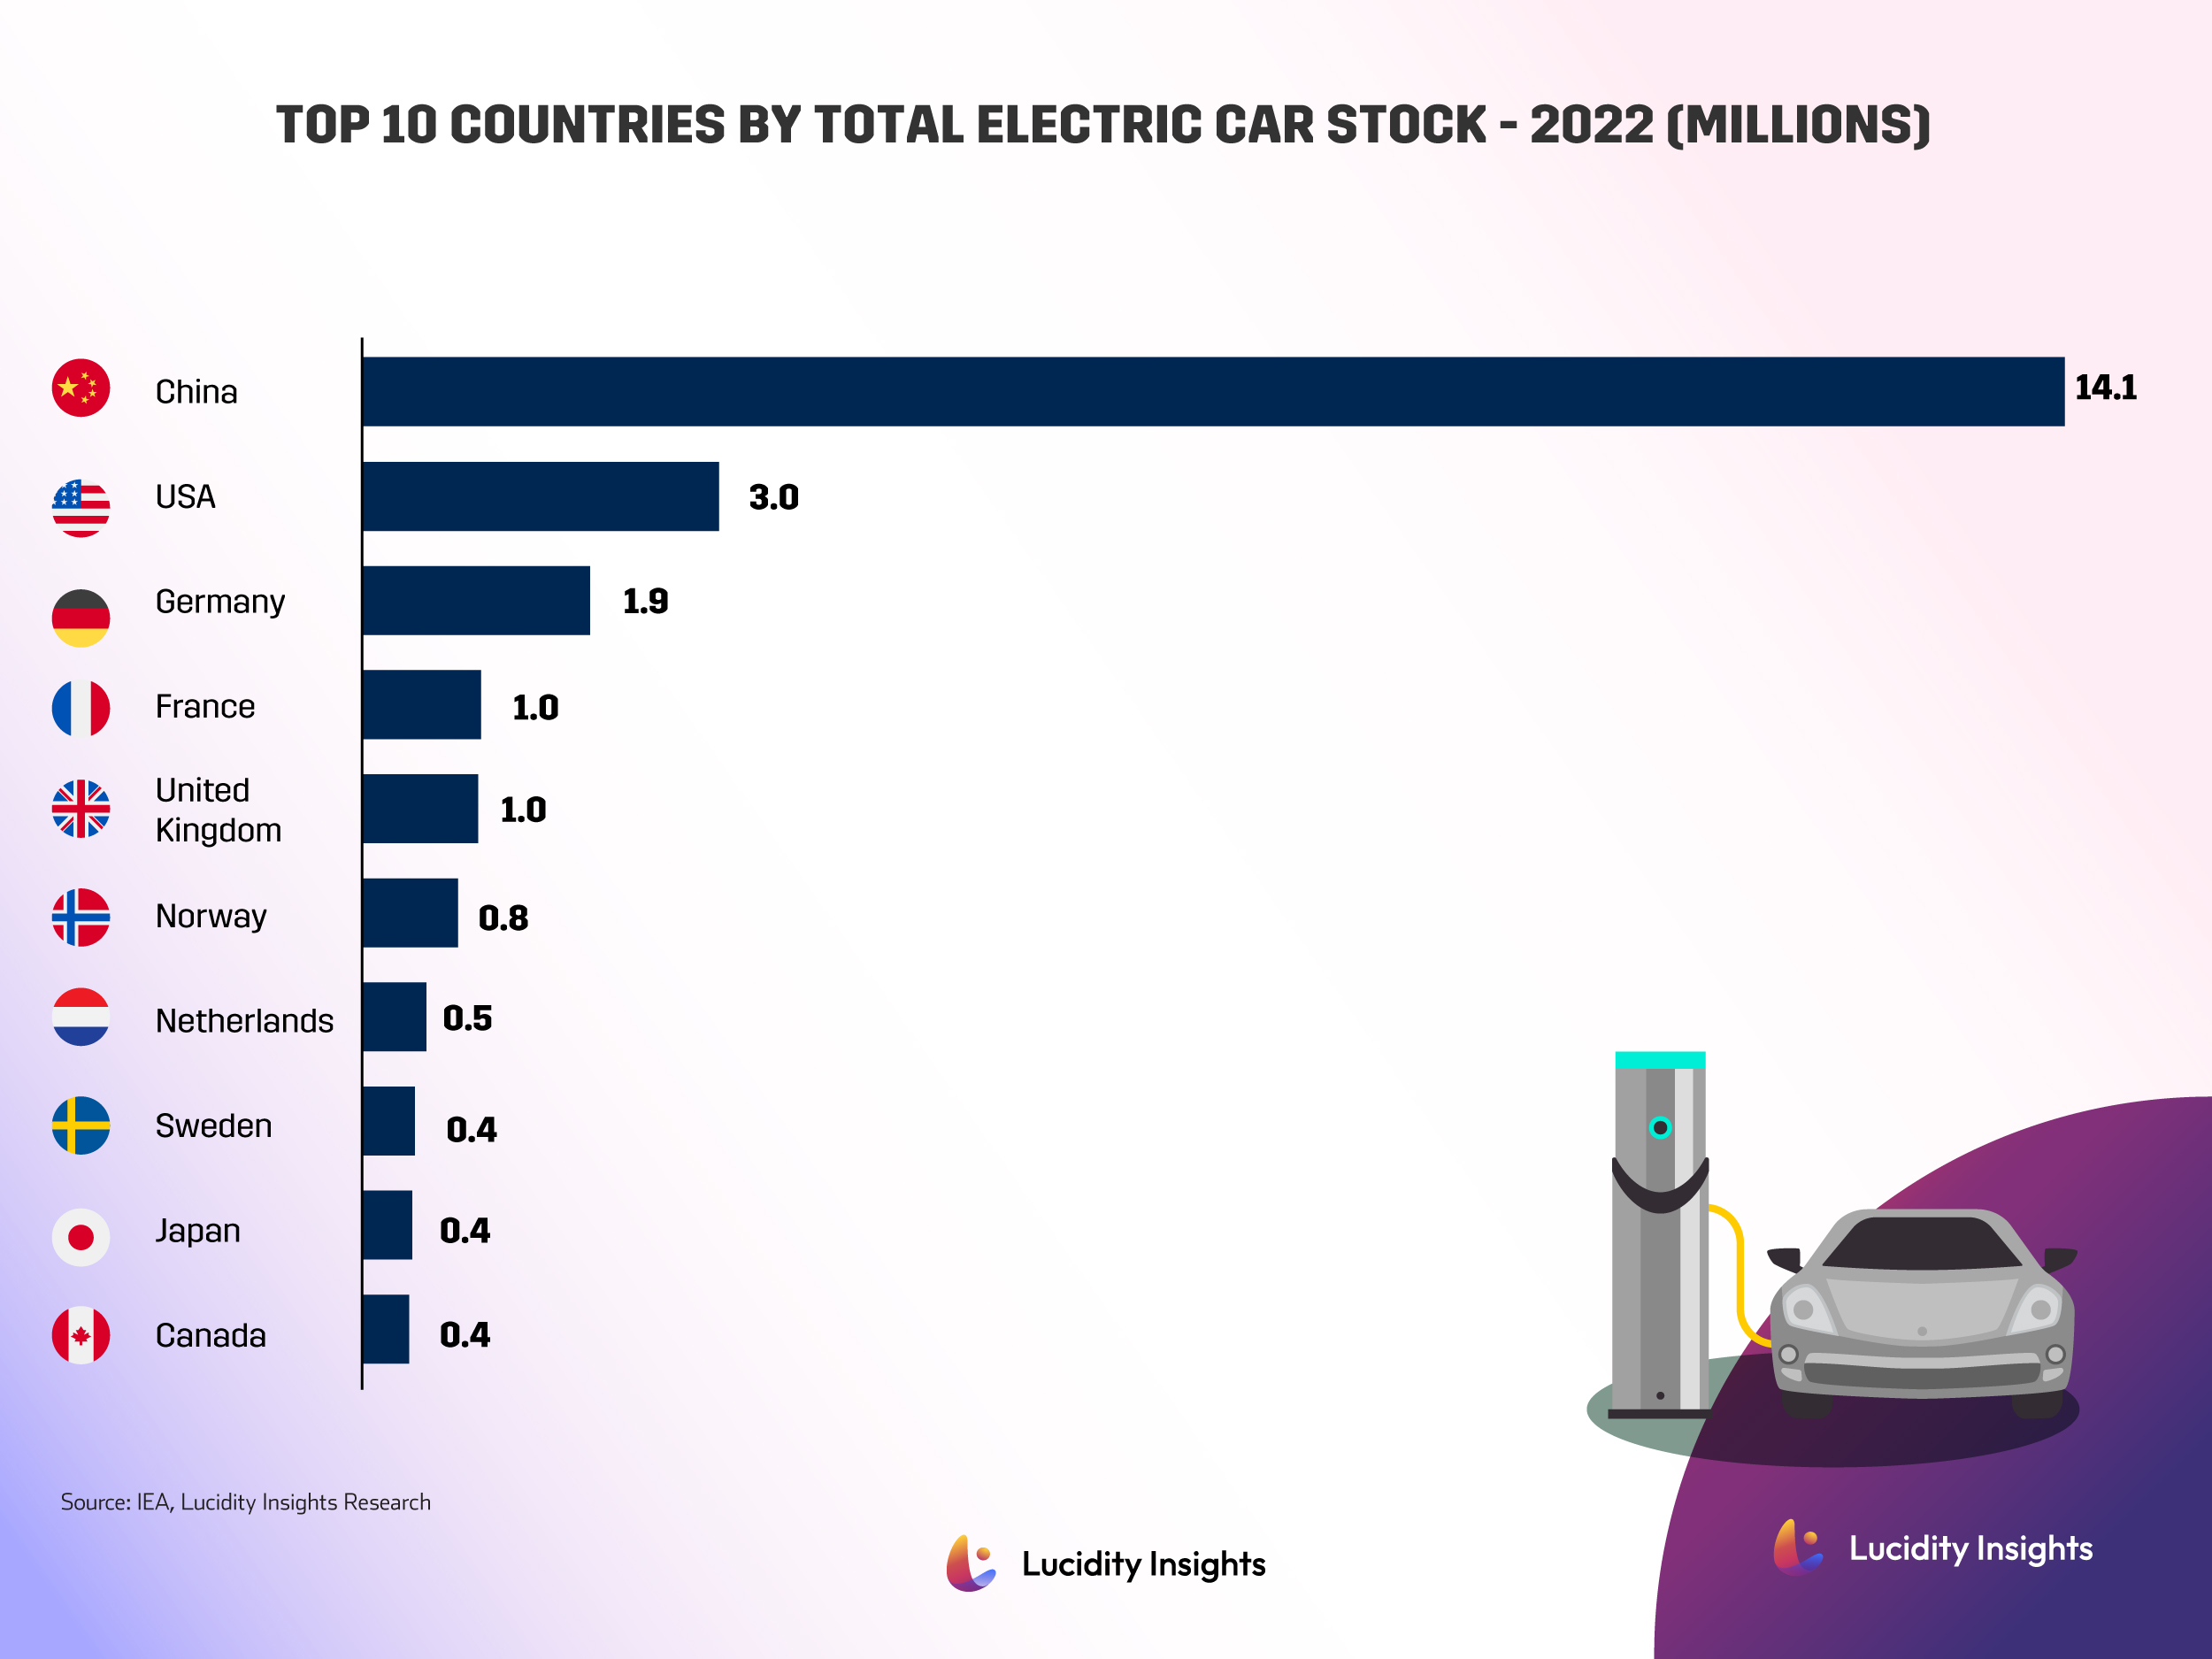 Top 10 Countries by Total Electric Car Stock - 2022 (Millions)